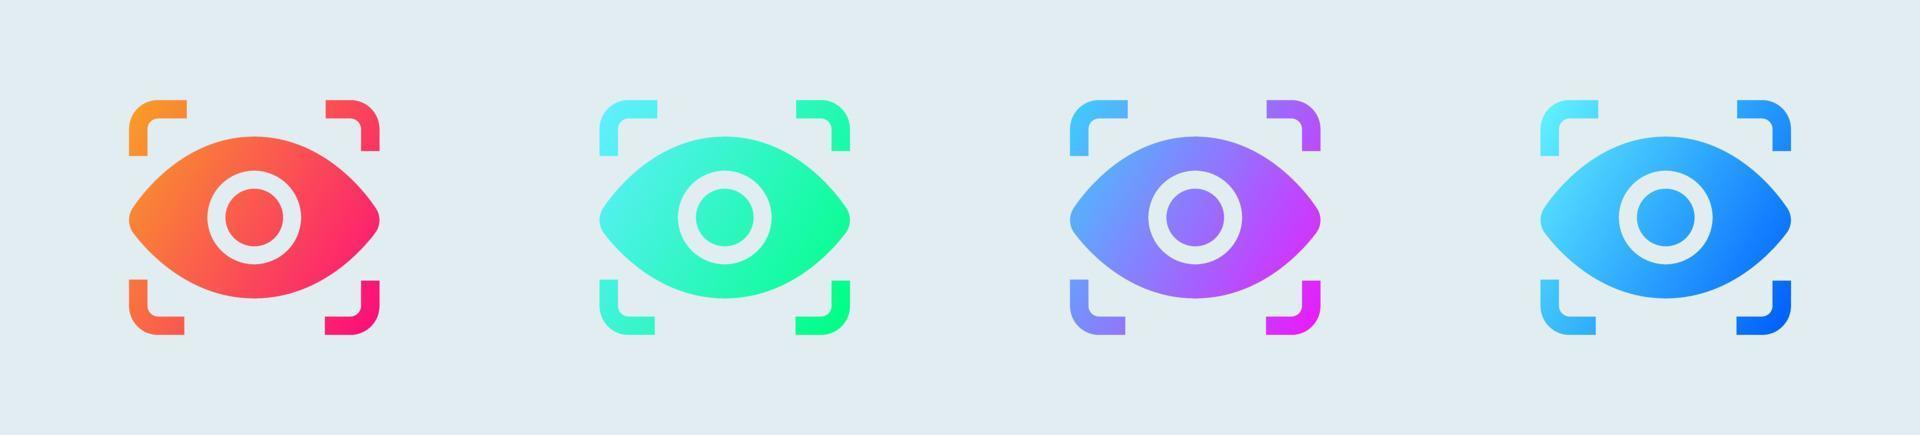 View solid icon in gradient colors. Eye signs vector illustration.